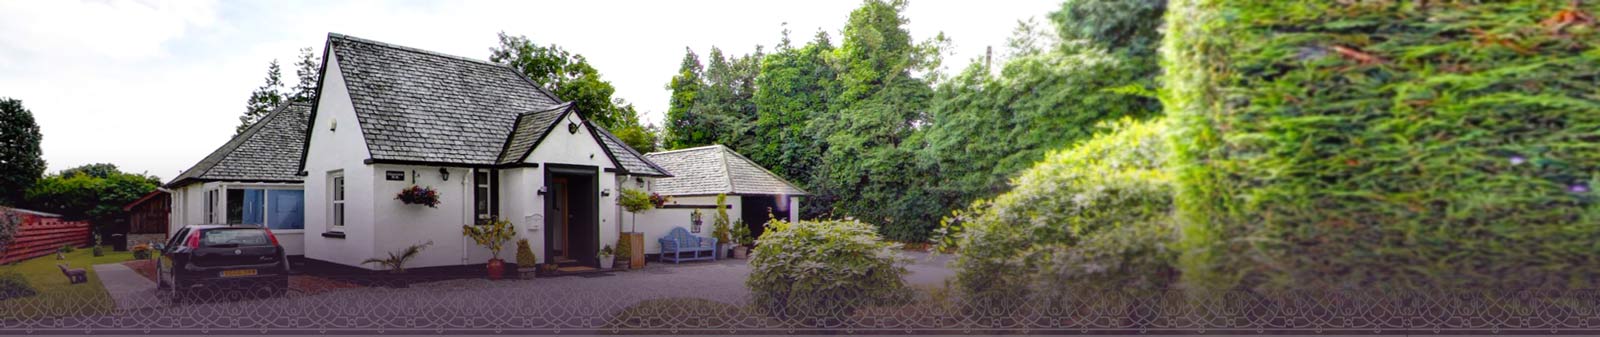 Driveway and front entrance of Glenview Luss, Cottage B&B Accommodation with Leylandii trees in the background